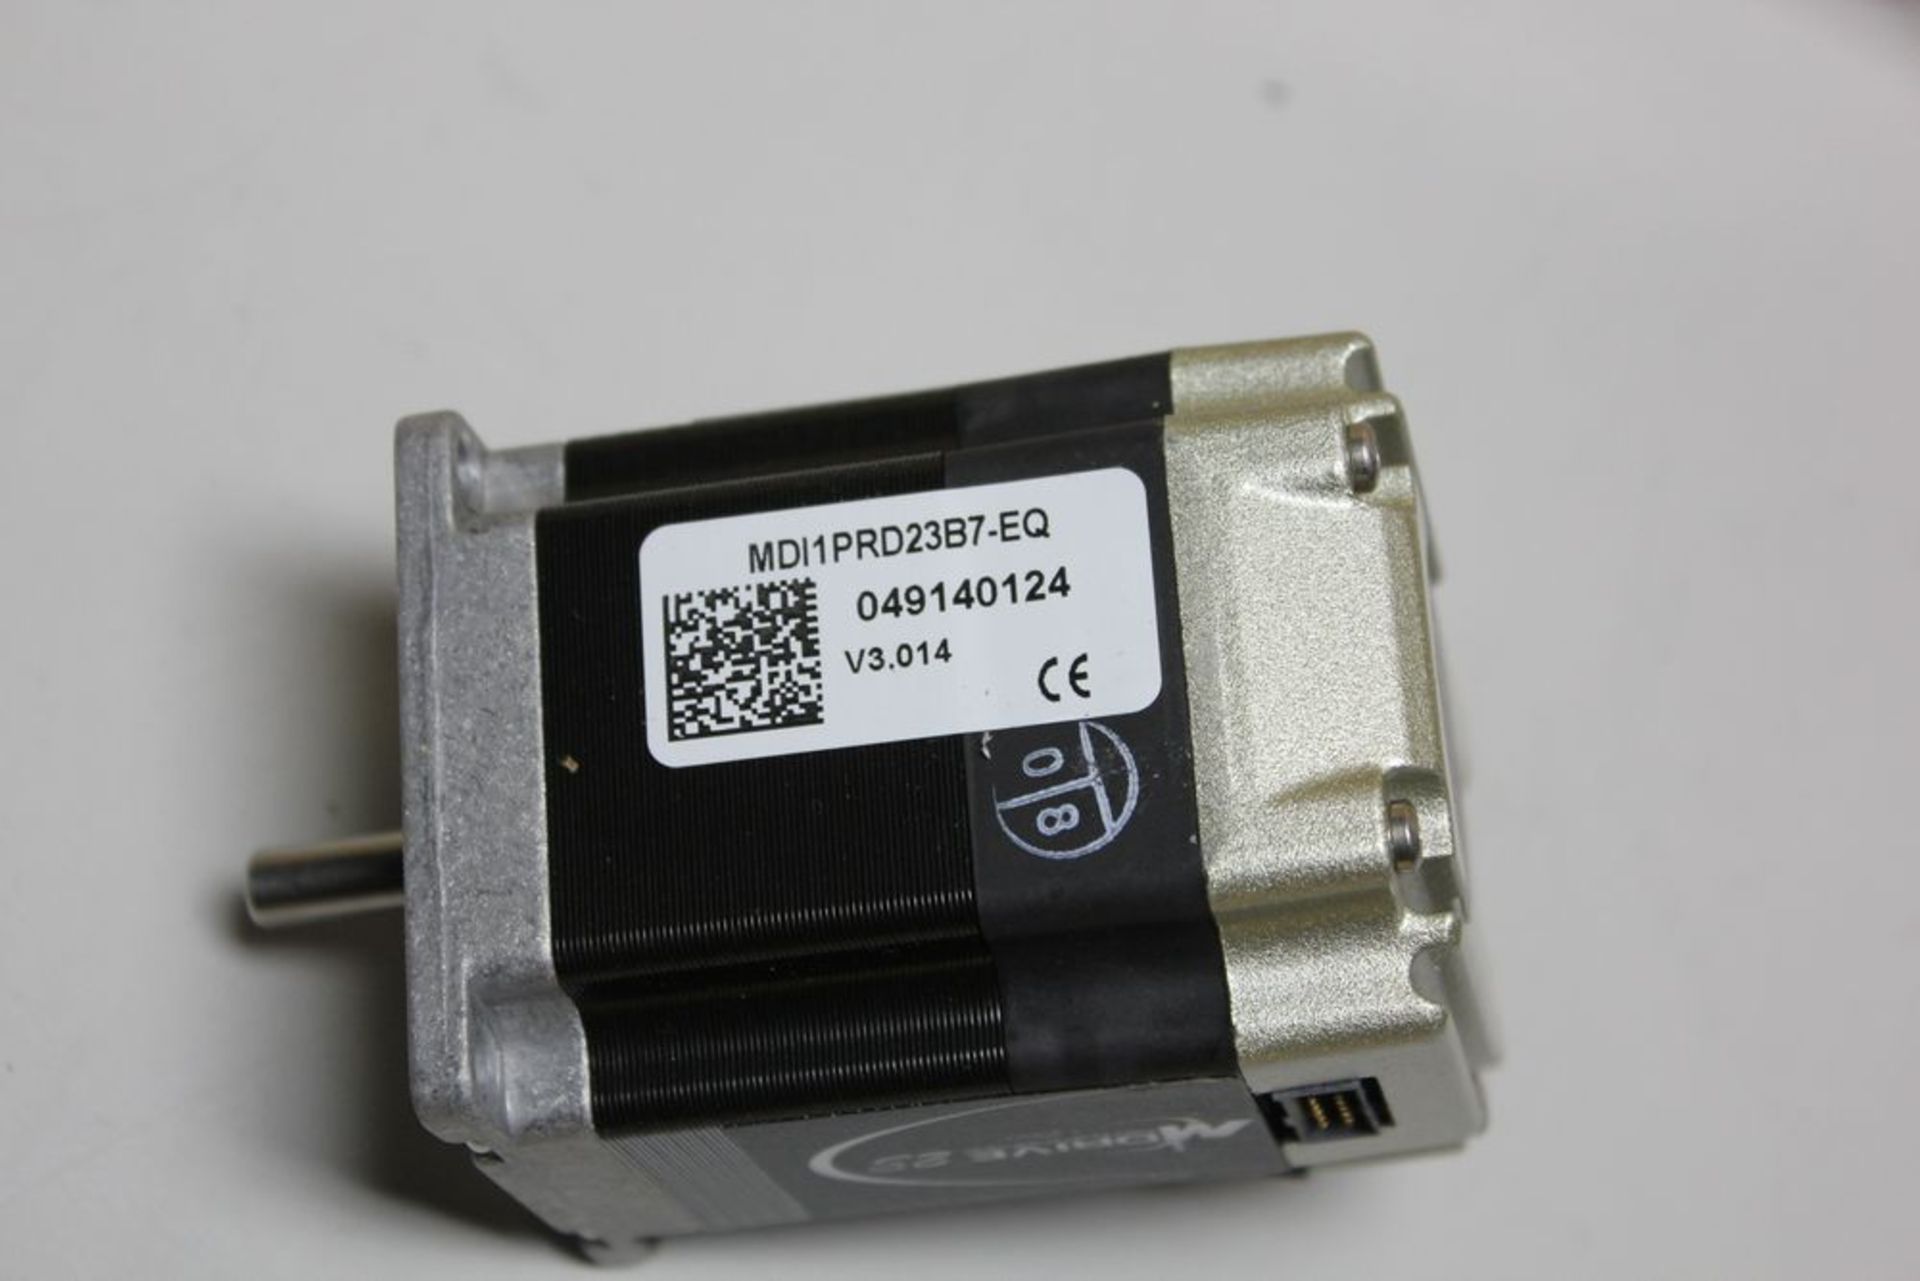 NEW SCHNEIDER MDRIVE 23 PLUS STEPPER MOTOR & DRIVE - Image 5 of 5